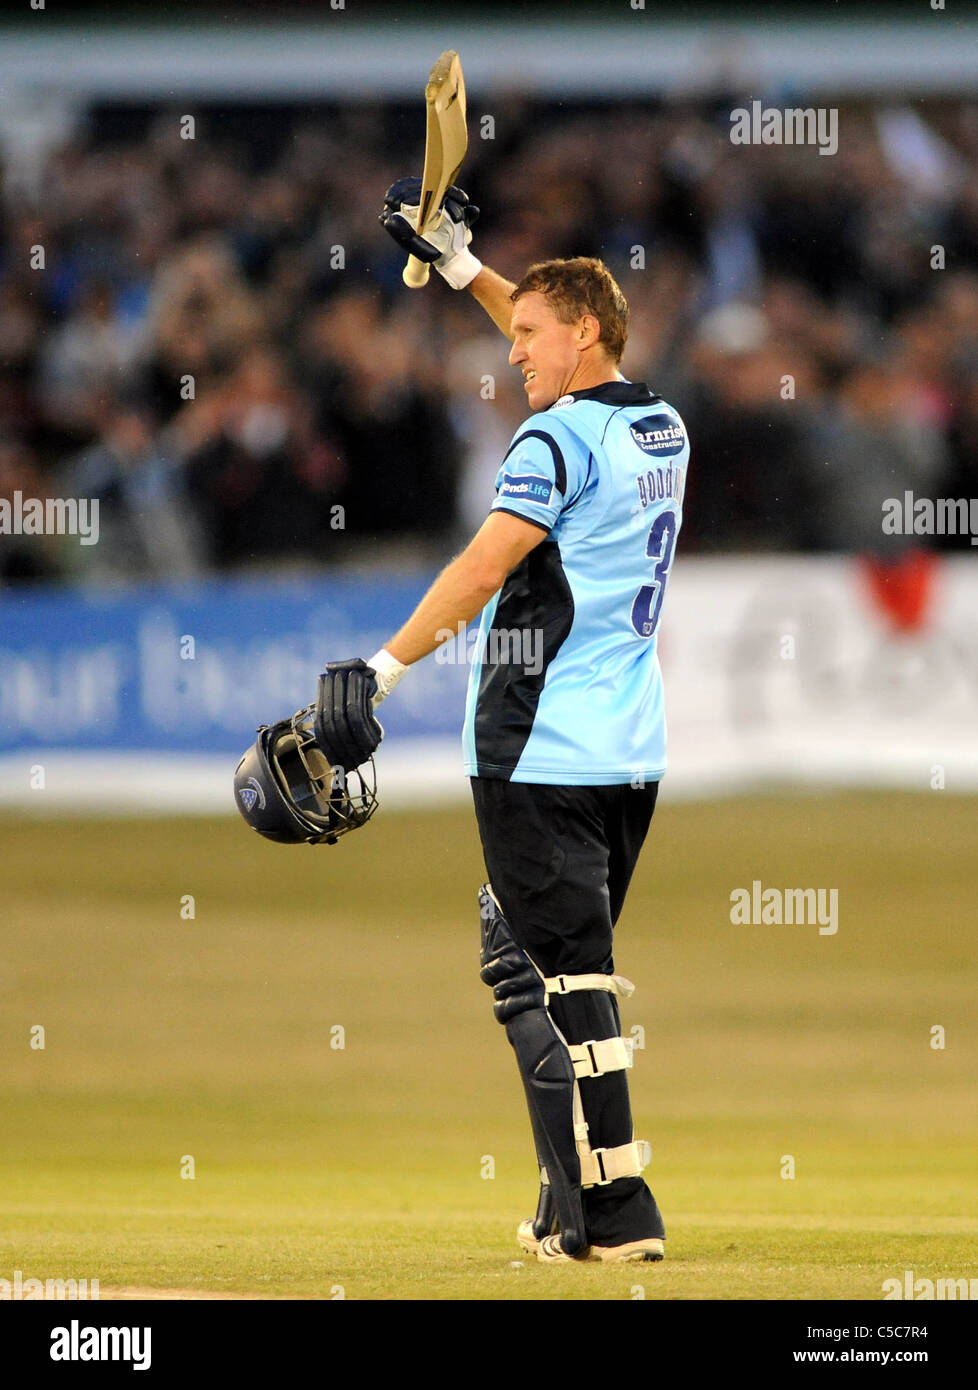 Sussex Sharks v Surrey Lions T20 cricket match at Hovel - Sussex batsman Murray Goodwin reaches his century Stock Photo